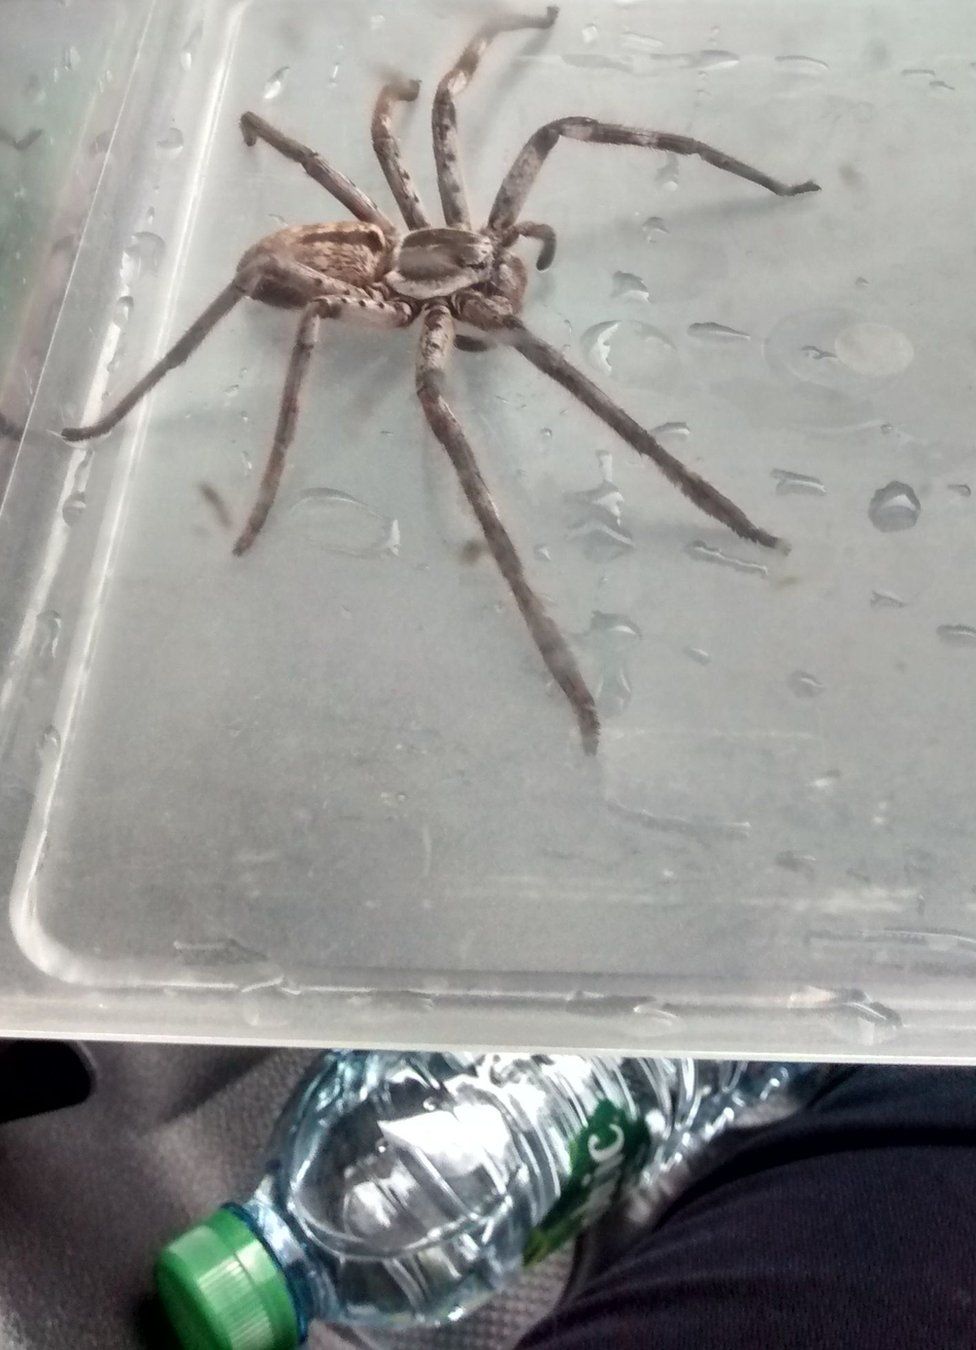 The spider, leg to leg, around the size of a water bottle